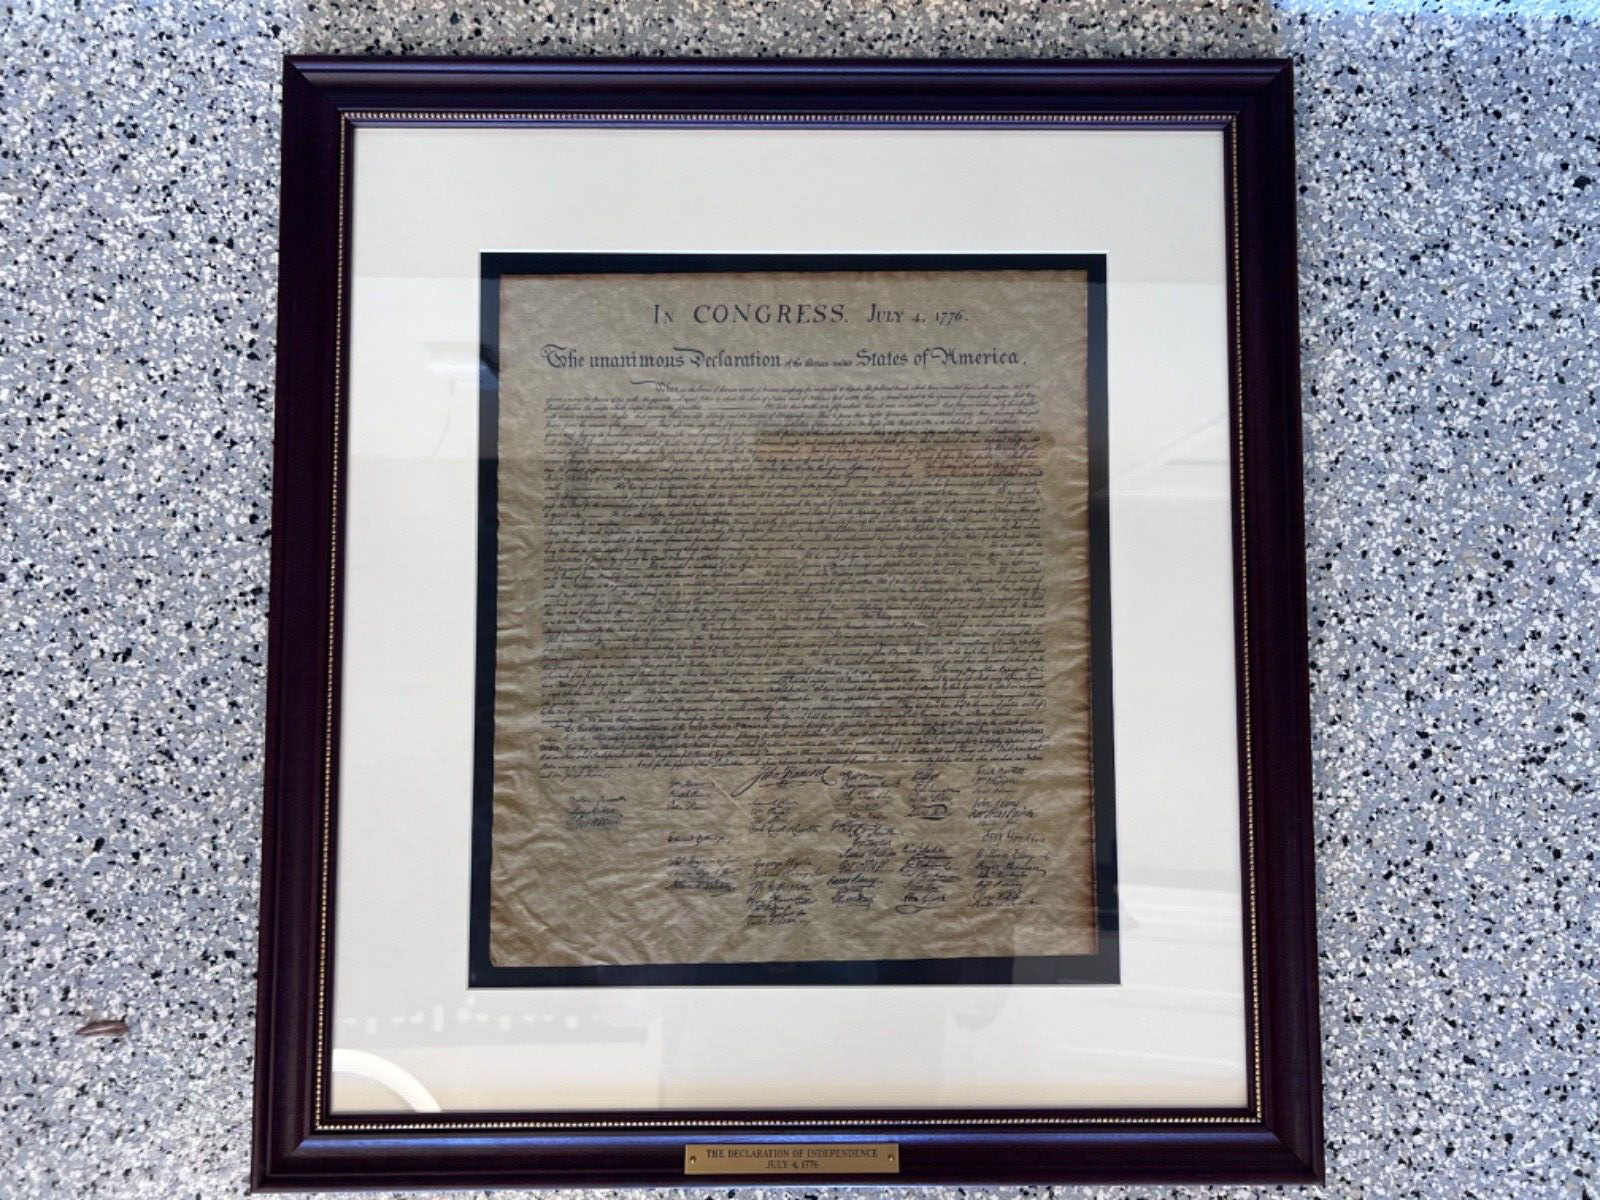 THE EASTON PRESS, FRAMED, MATTED COPY OF THE BILL OF RIGHTS